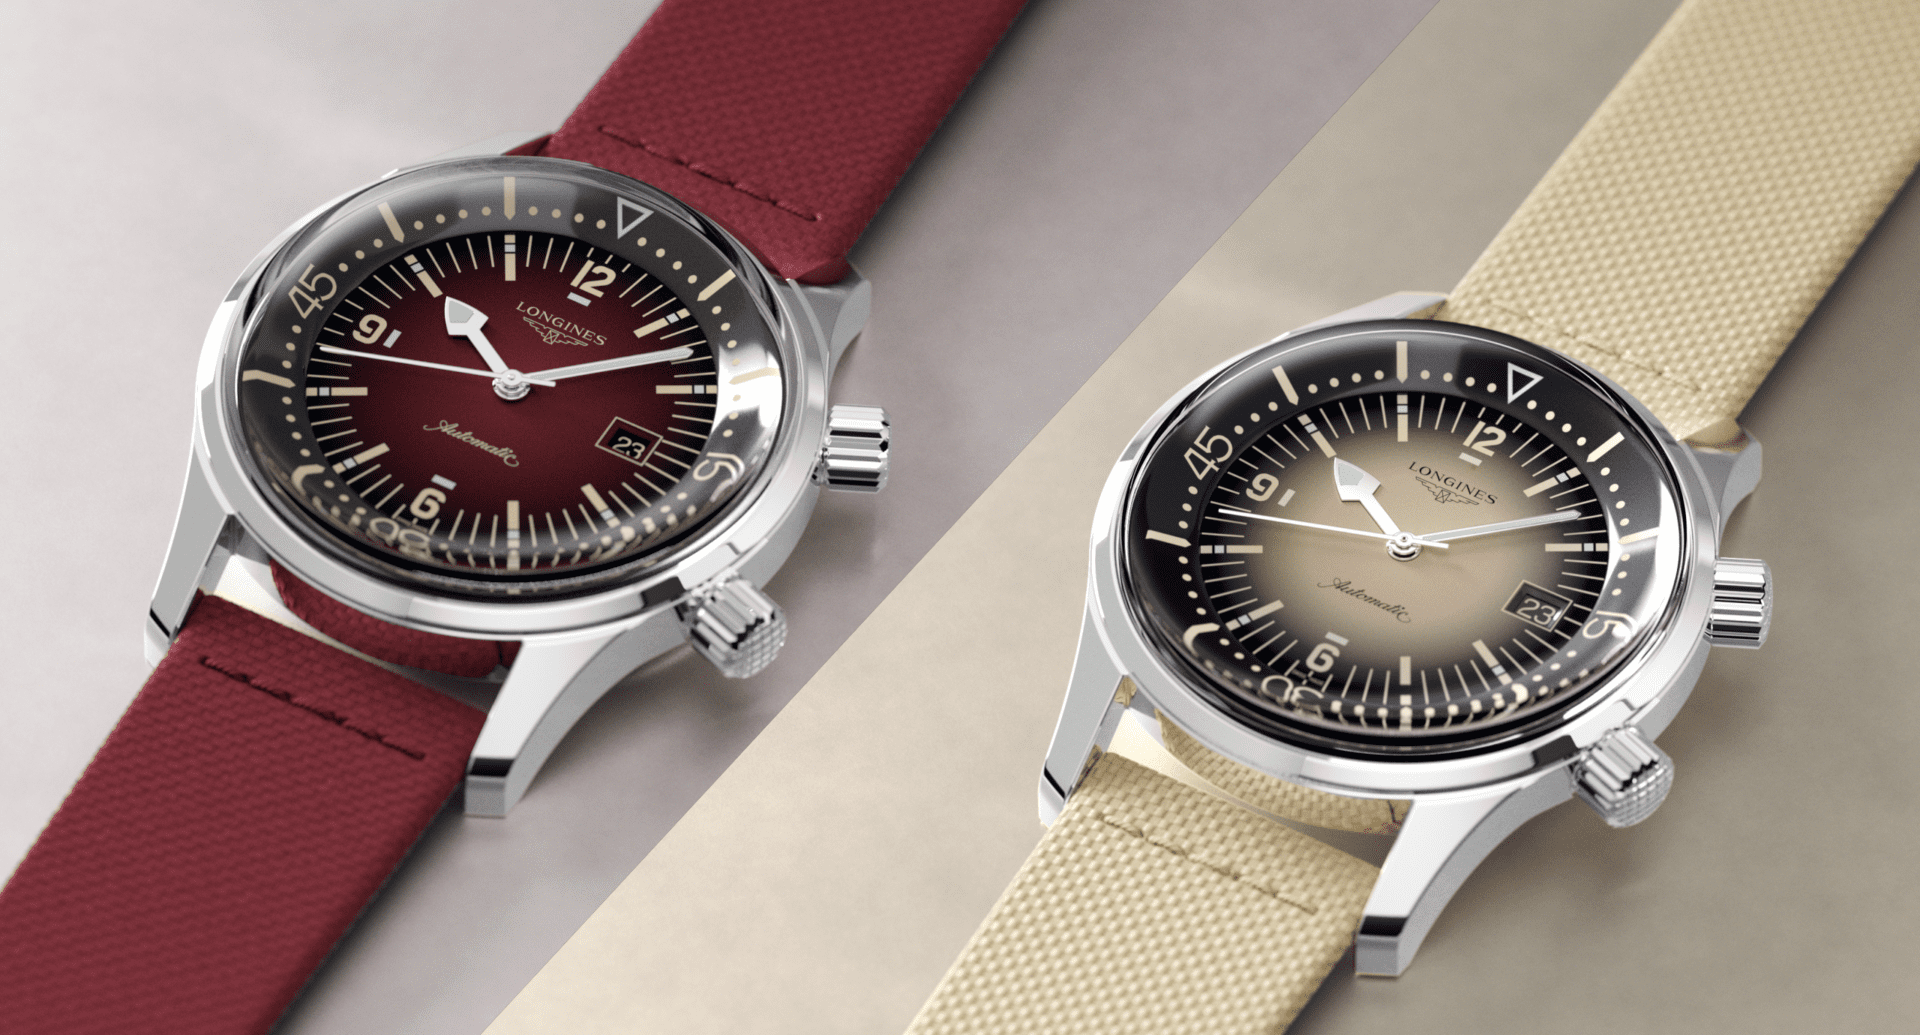 INTRODUCING: The Longines Legend Diver Watch adds new gradient dials to its repertoire